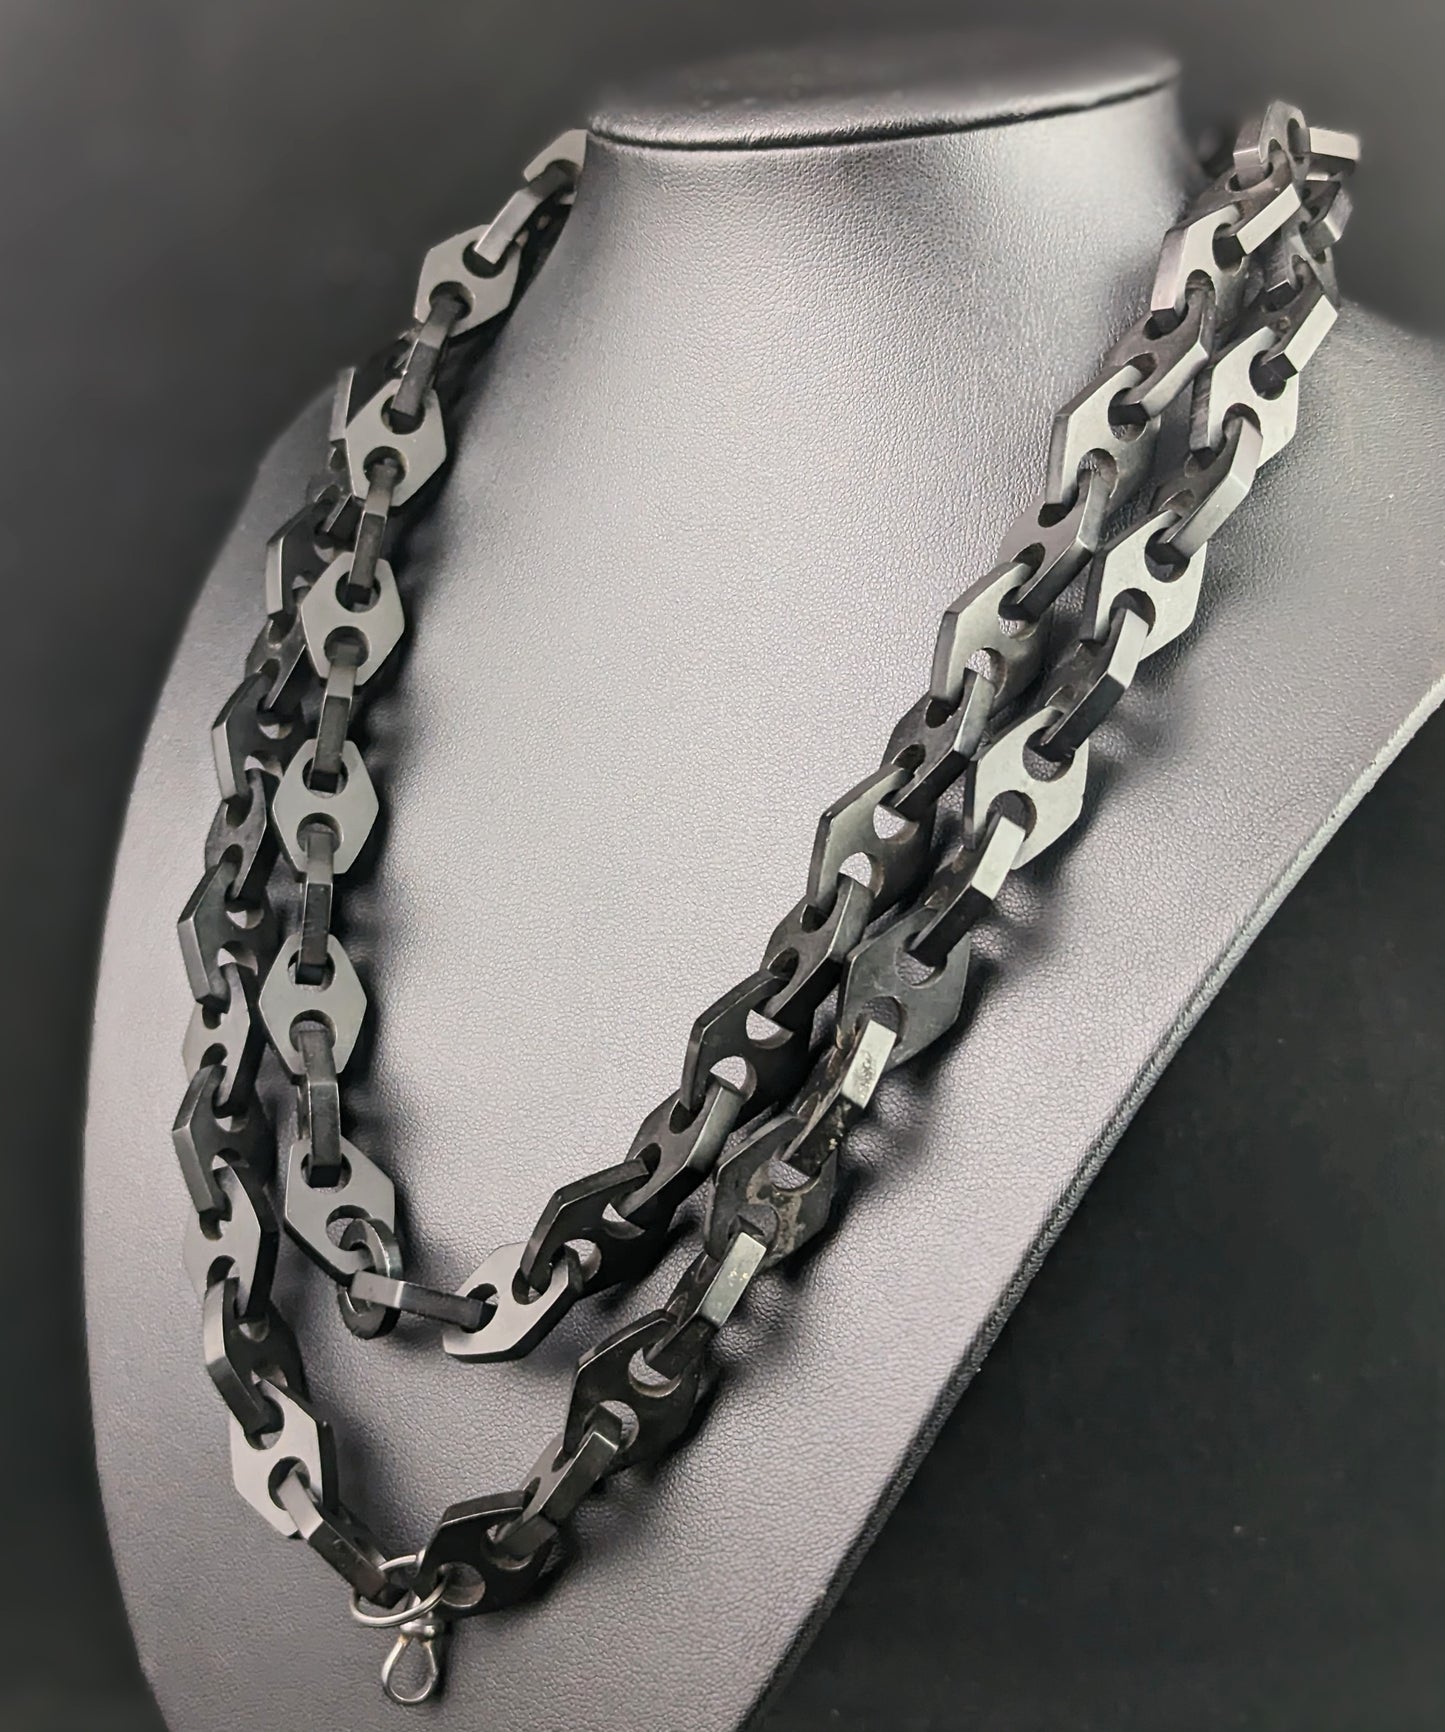 Antique Vulcanite longuard chain necklace, mourning